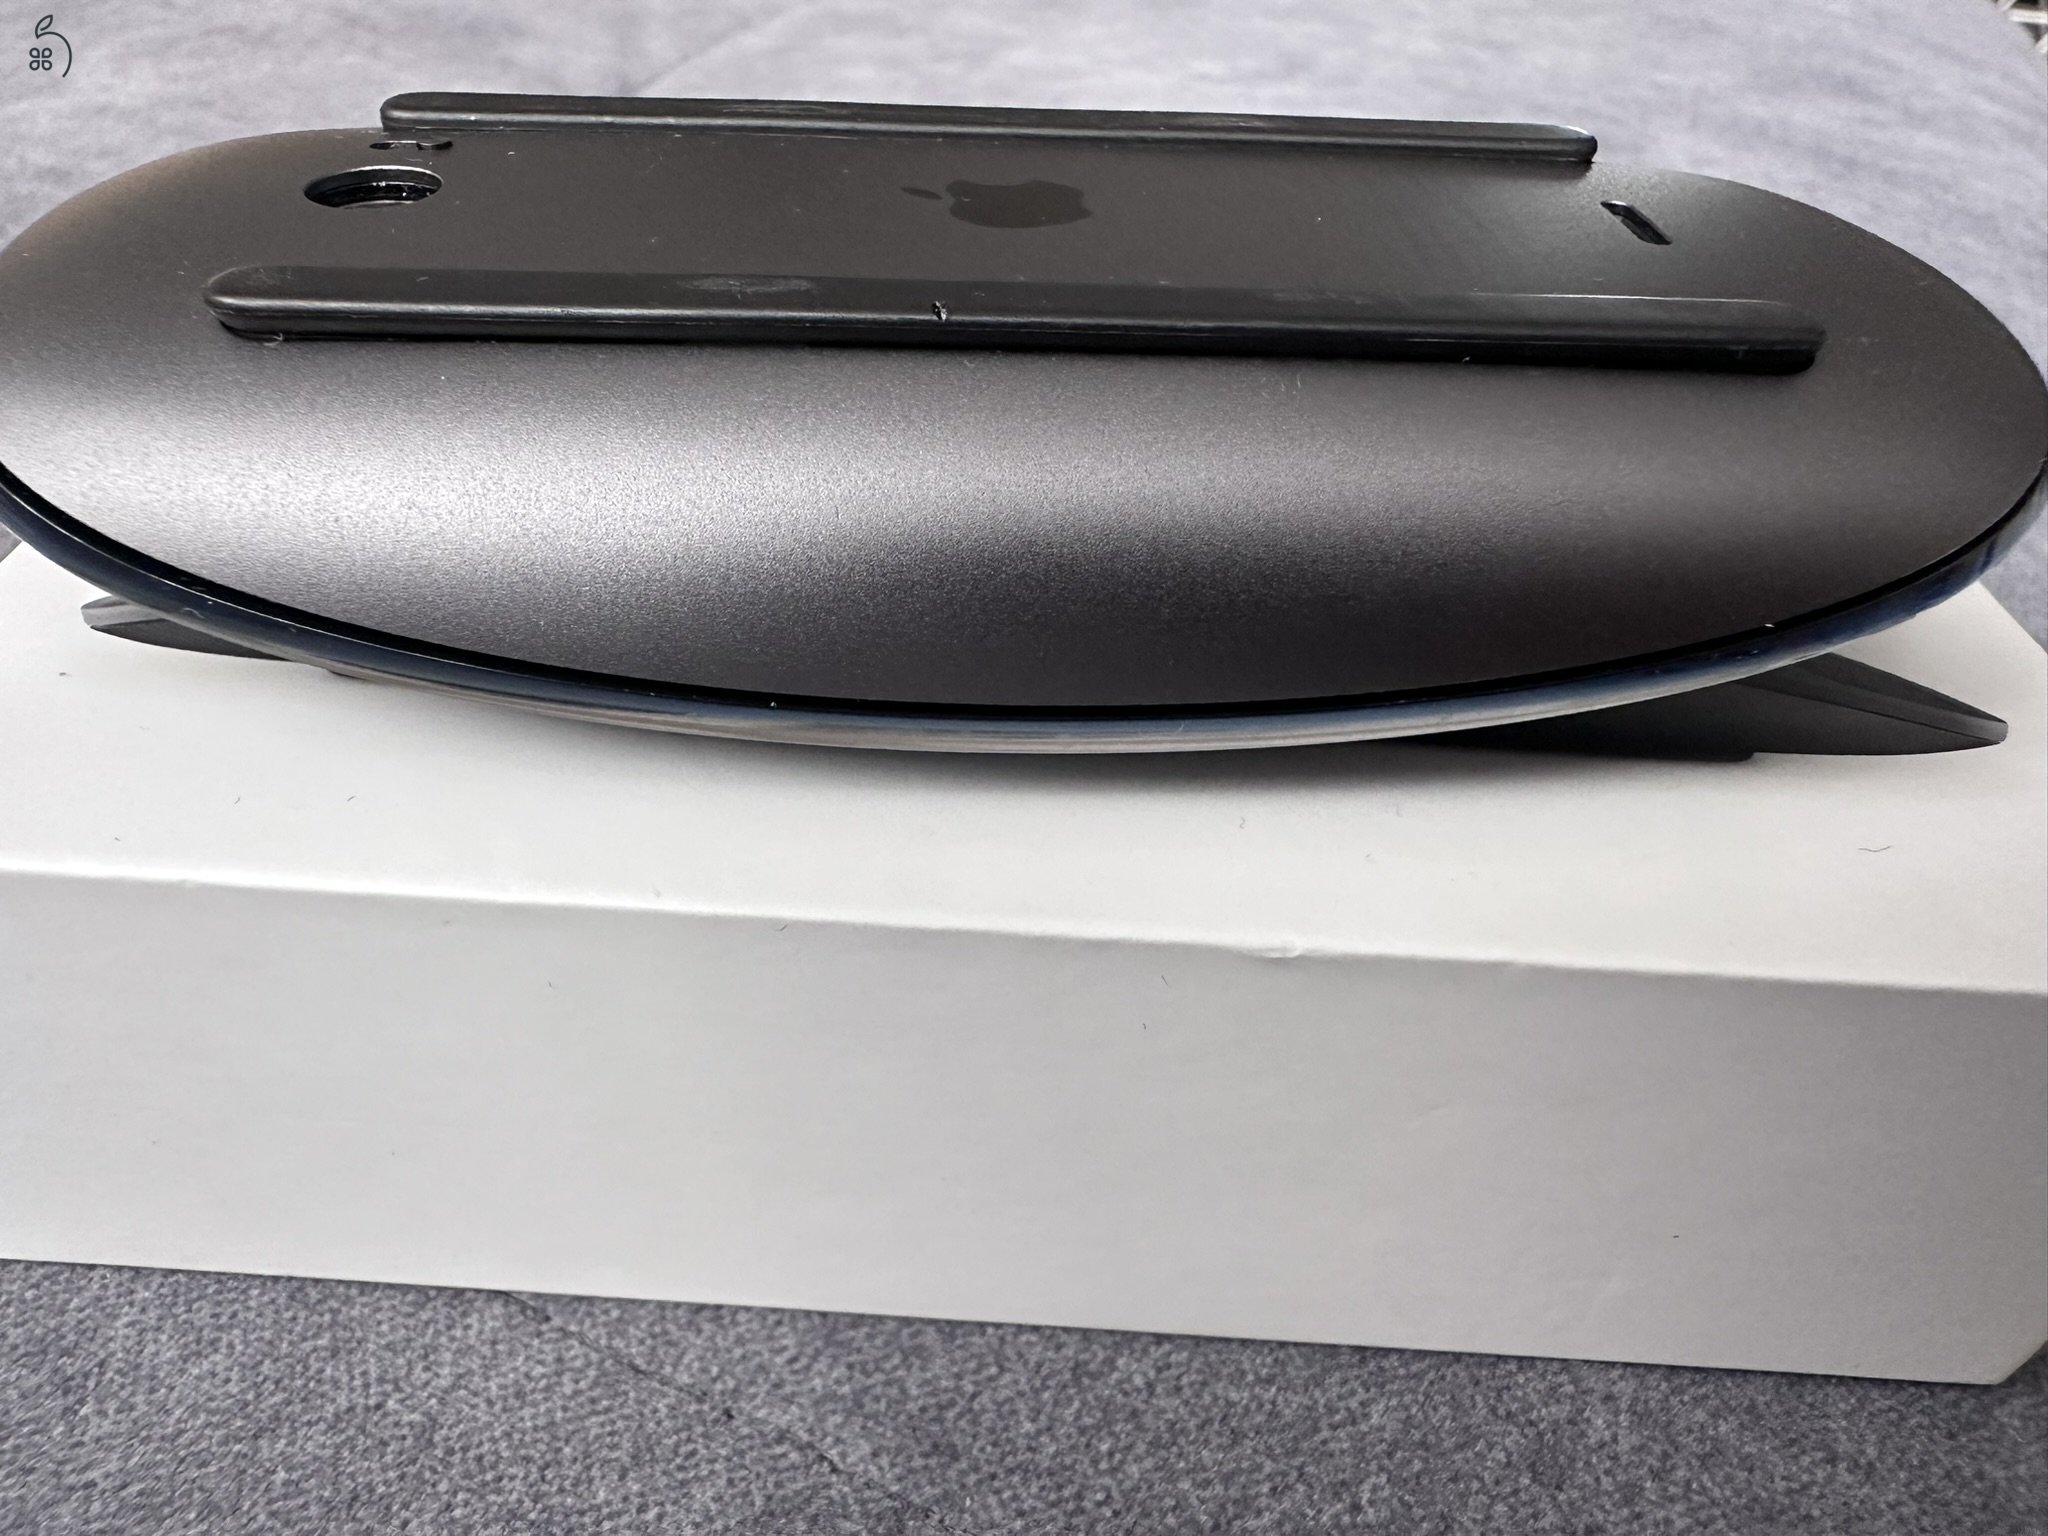 Magic Mouse 2 - Space Gray